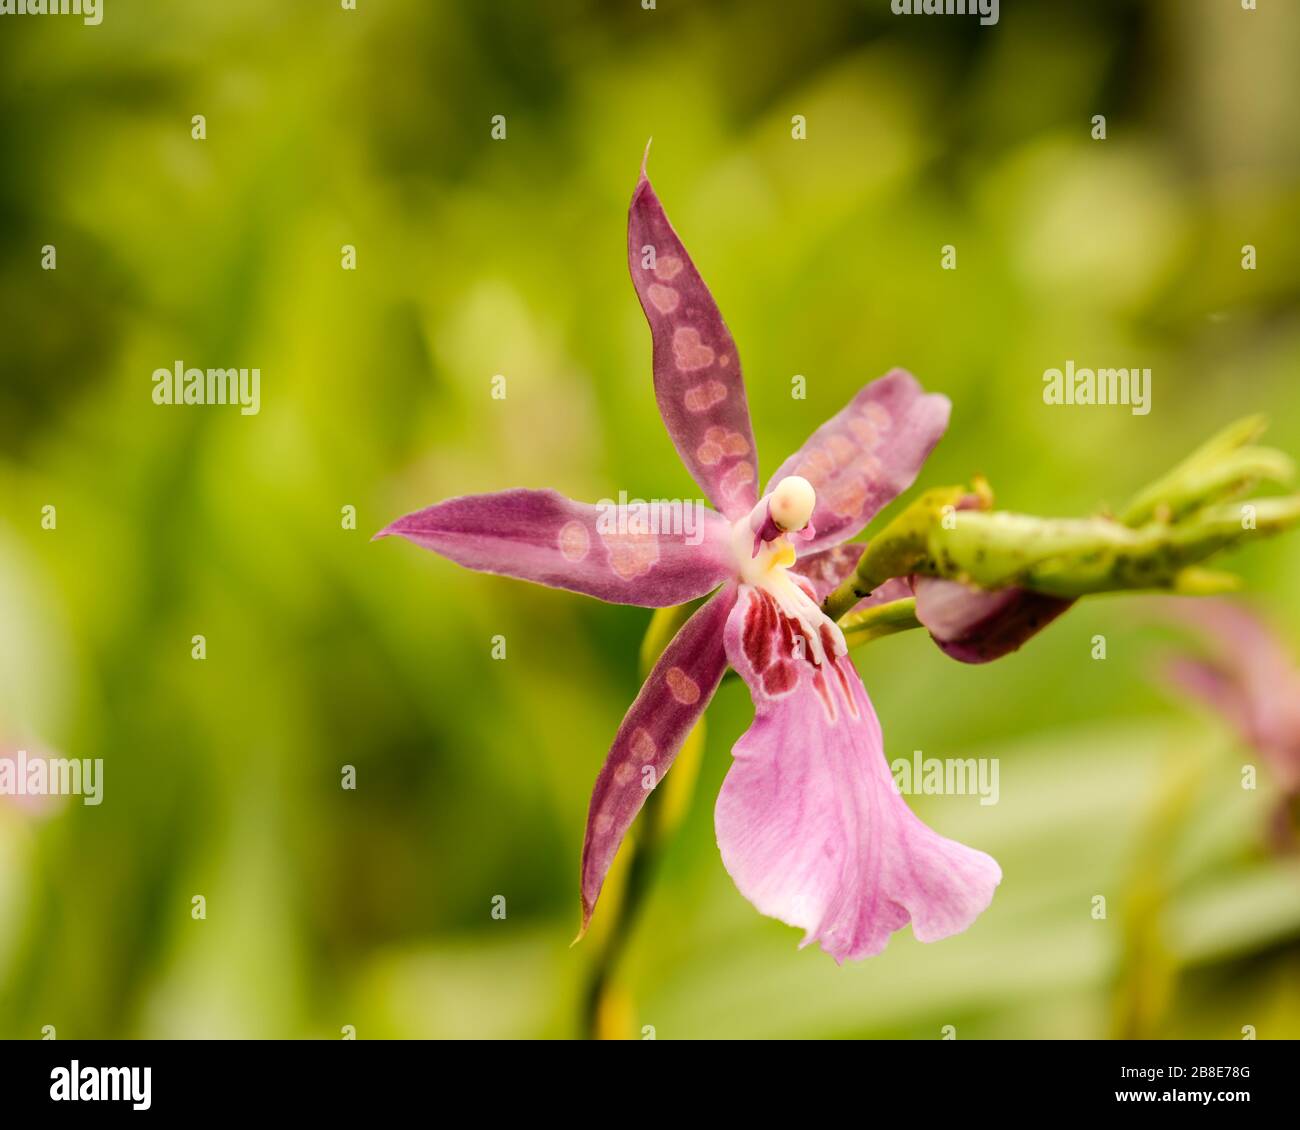 Stunning, simple closeup of a Spider Orchid Flower on a stem, against a blurred green background. Stock Photo